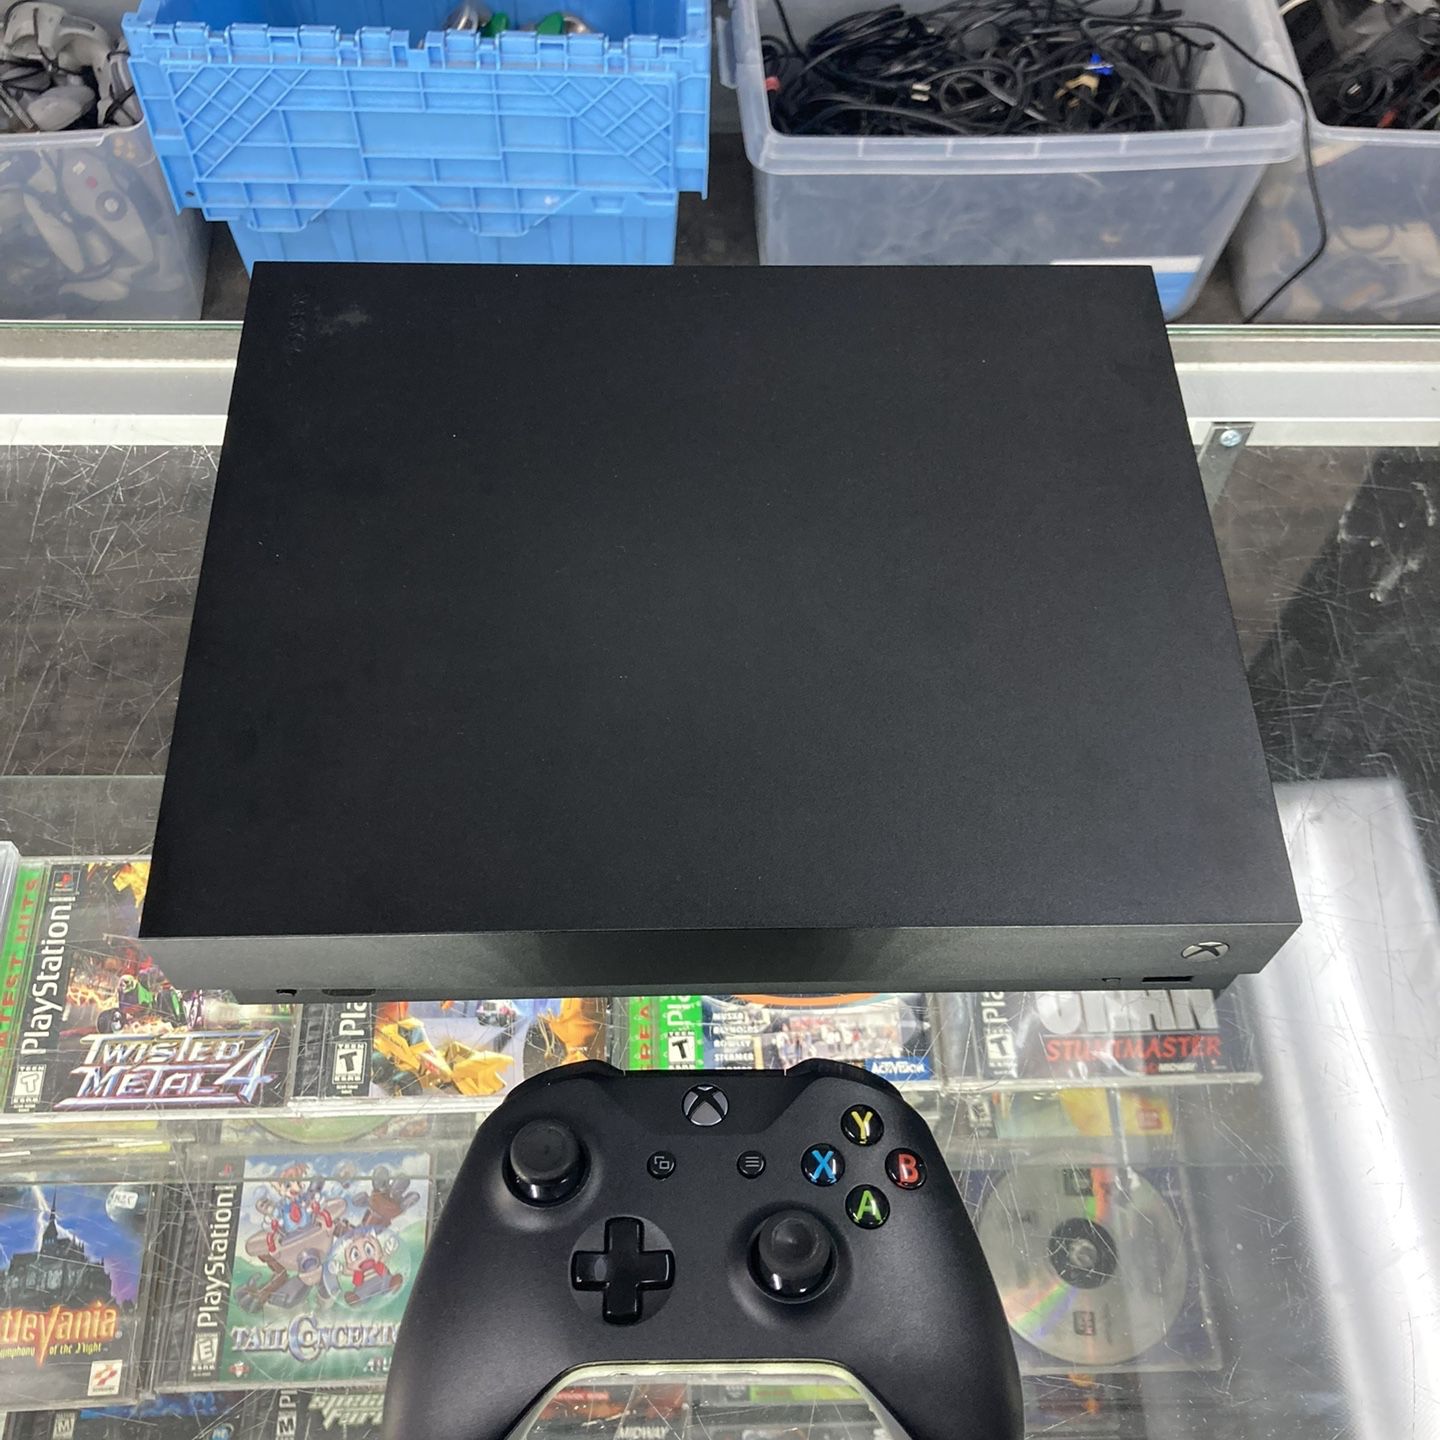 Xbox One X Complete $200 Gamehogs 11am-7pm